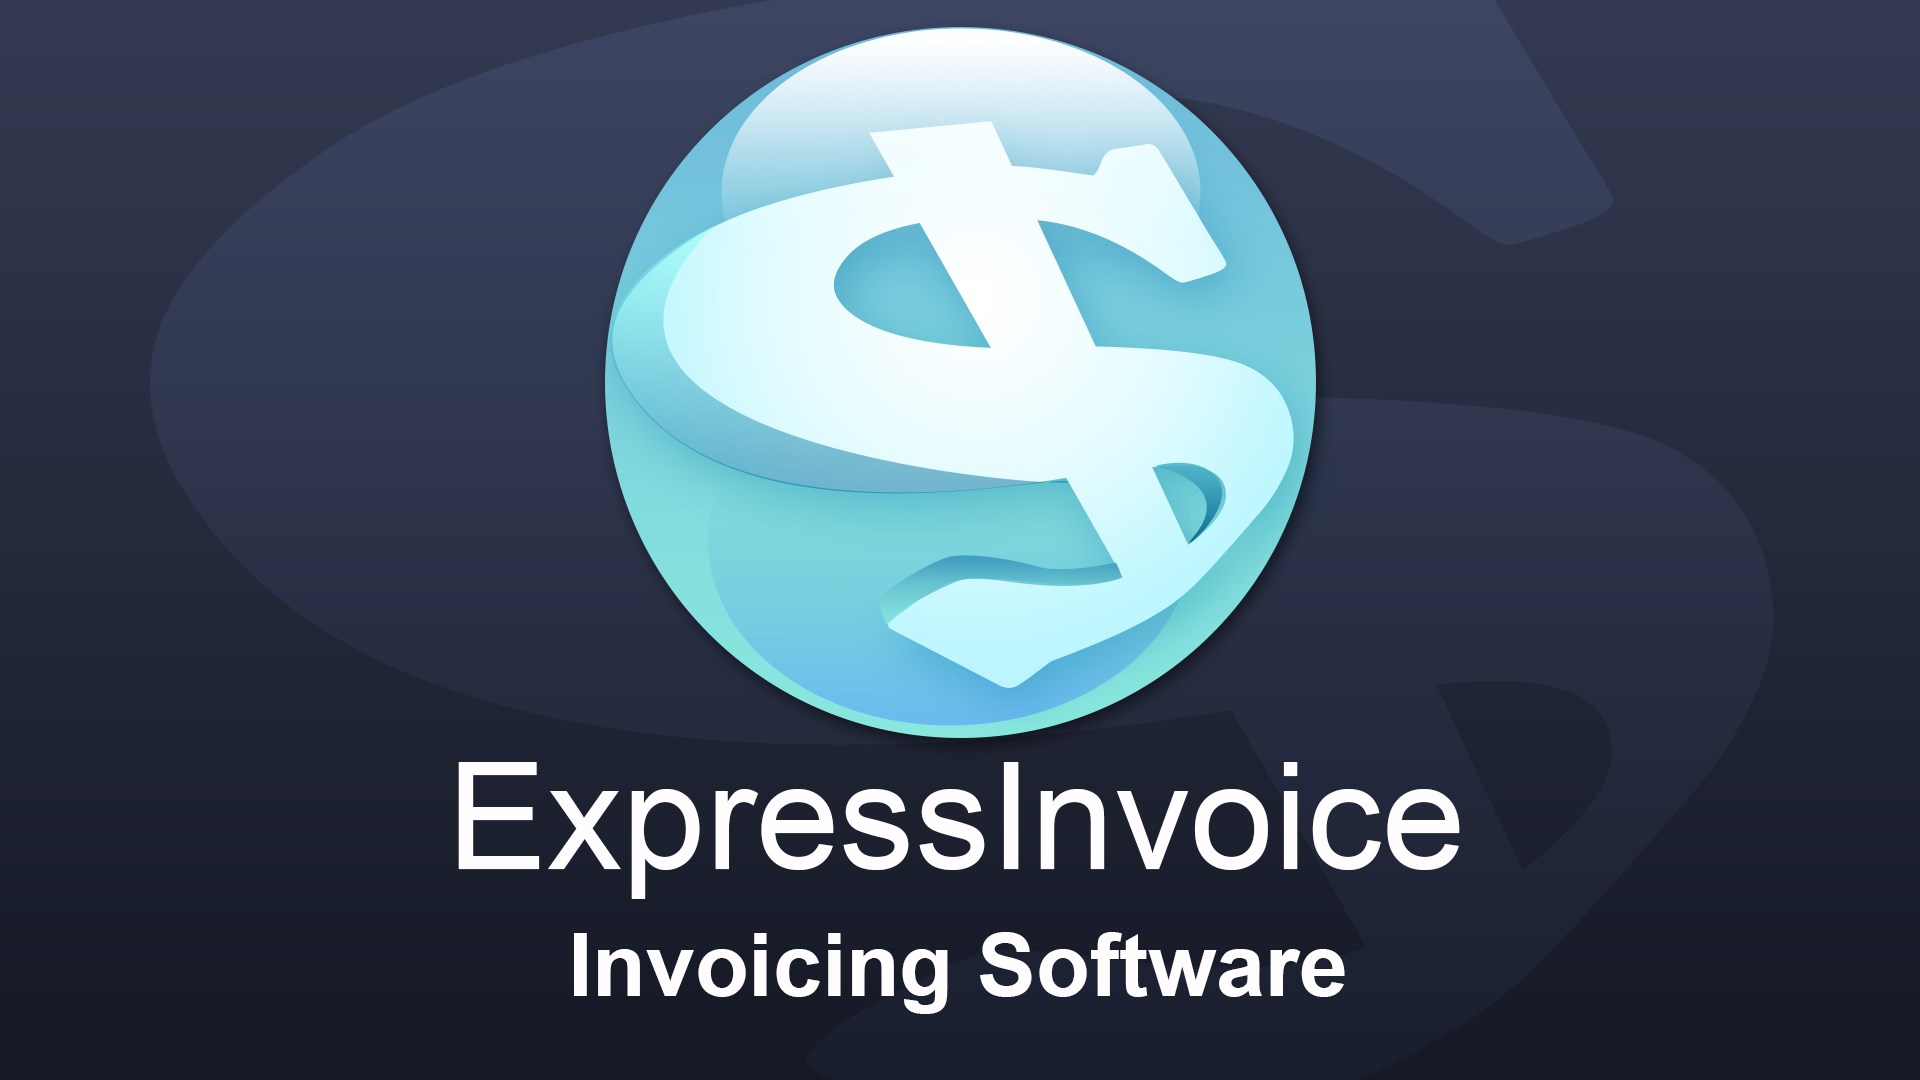 NCH: Express Invoice Invoicing Key, $203.62